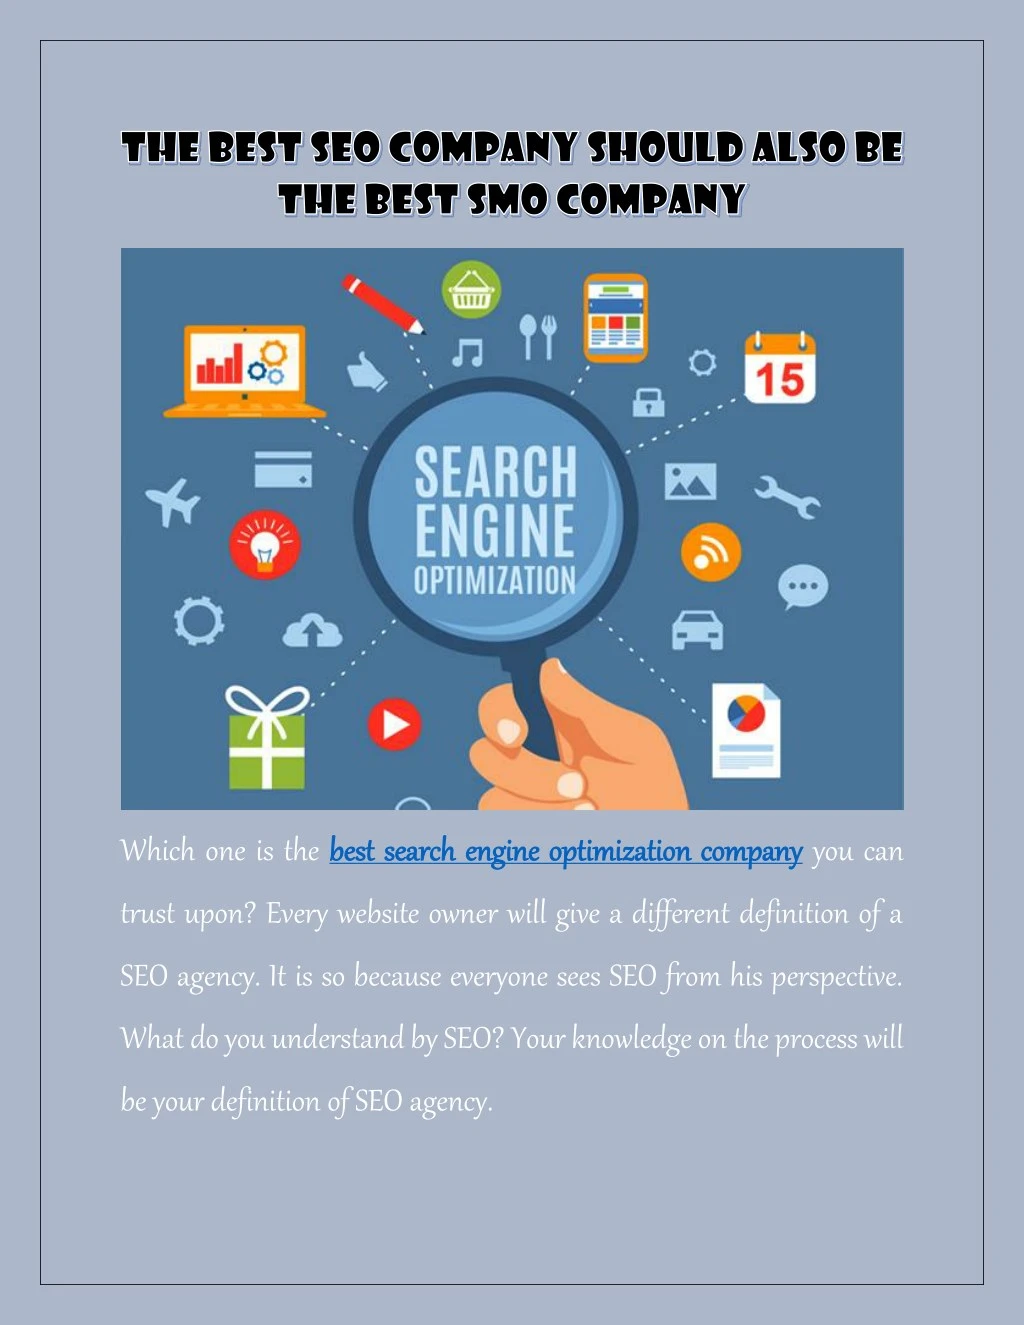 which one is the best search engine optimization